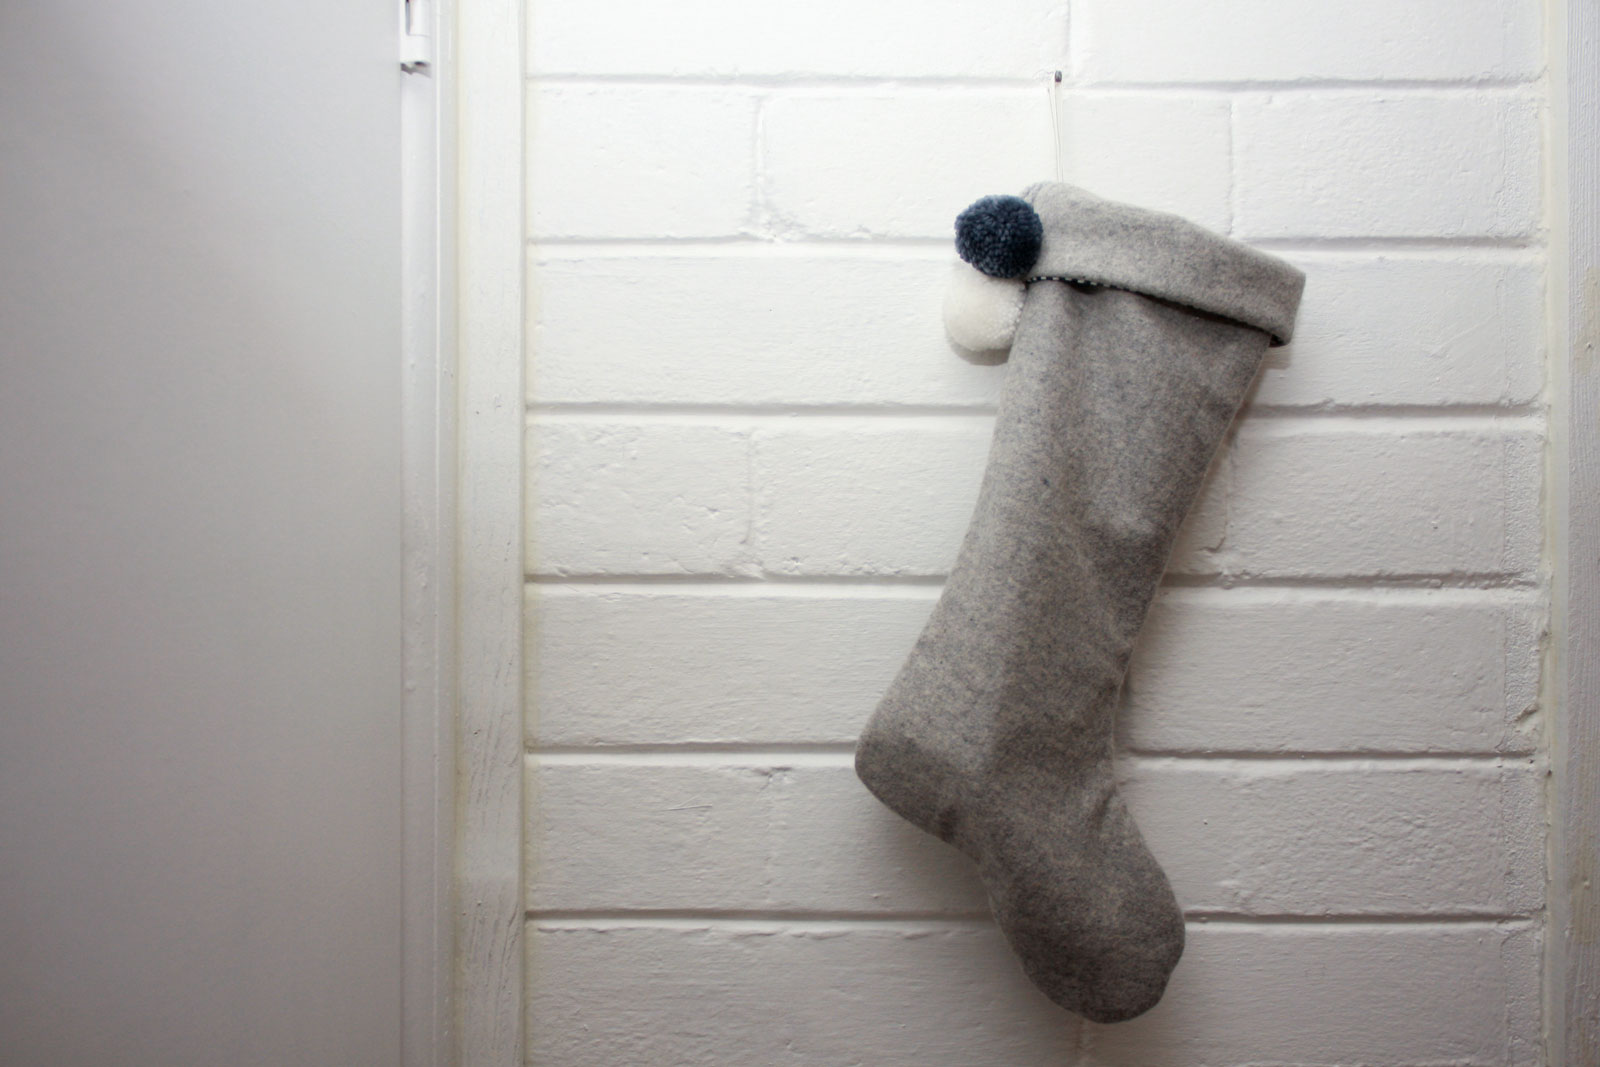 A grey stocking hangs on a white brick wall